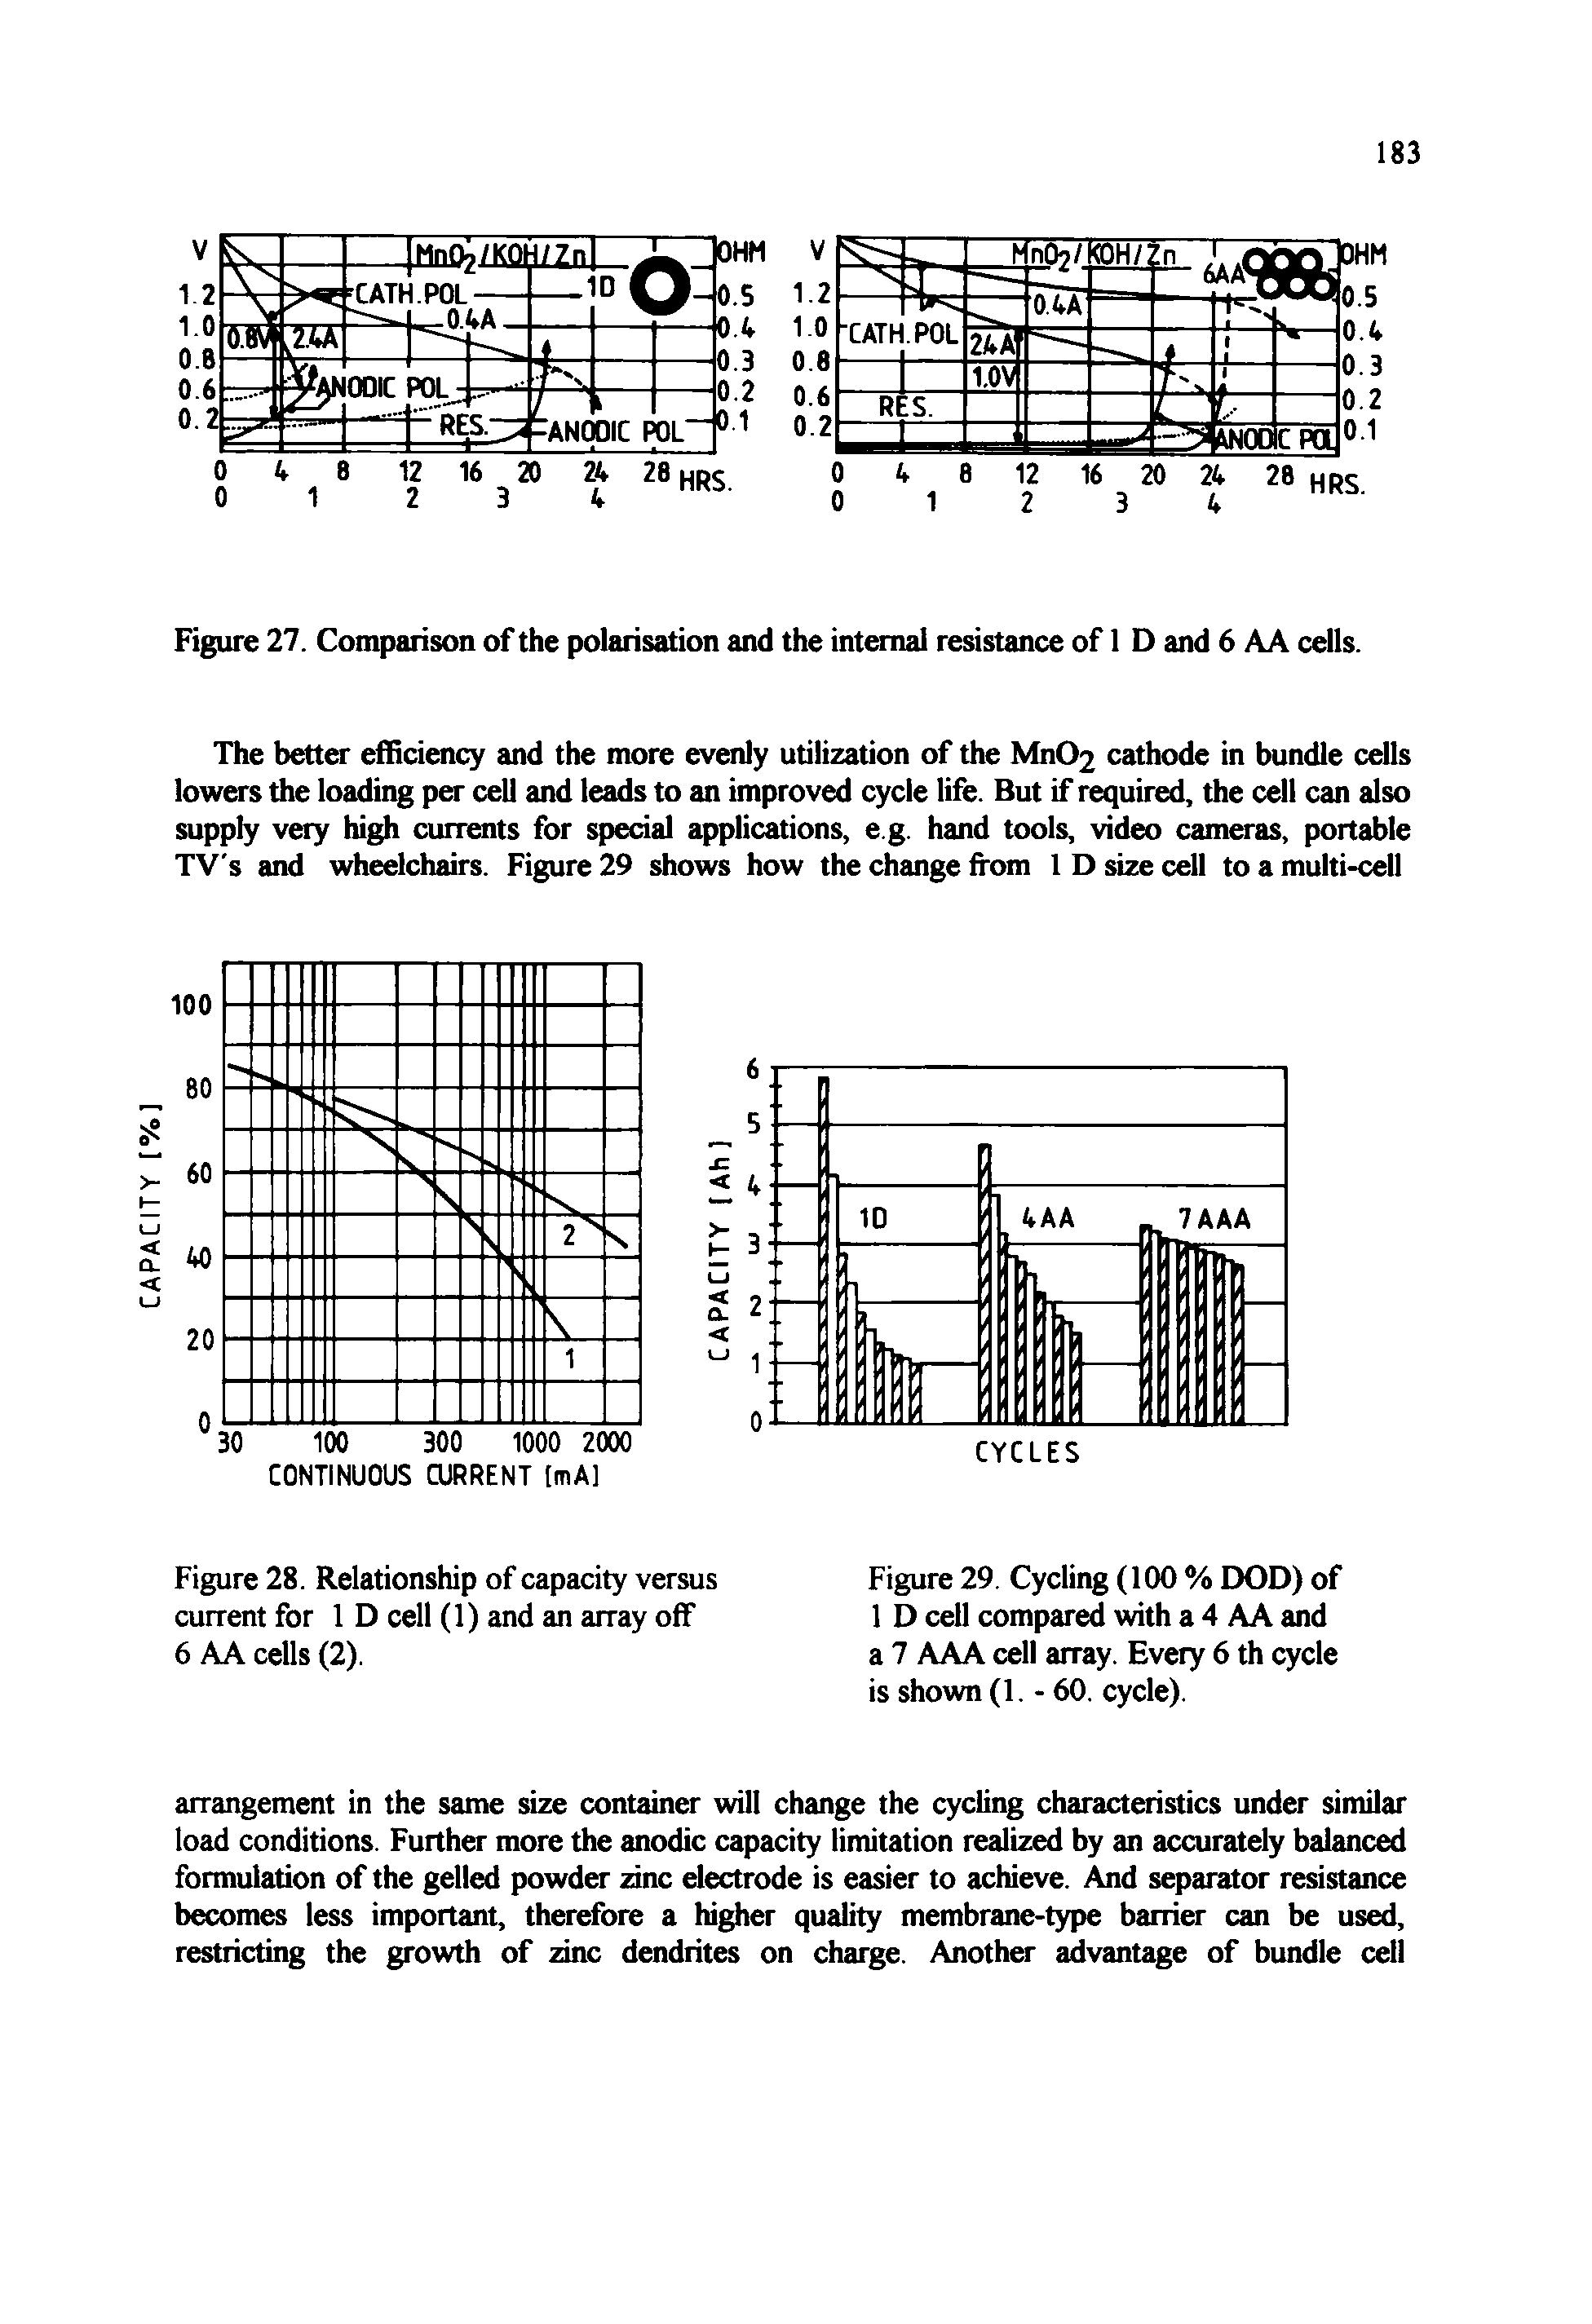 Figure 28. Relationship of capacity versus current for 1 D cell (1) and an array off 6 AA cells (2).